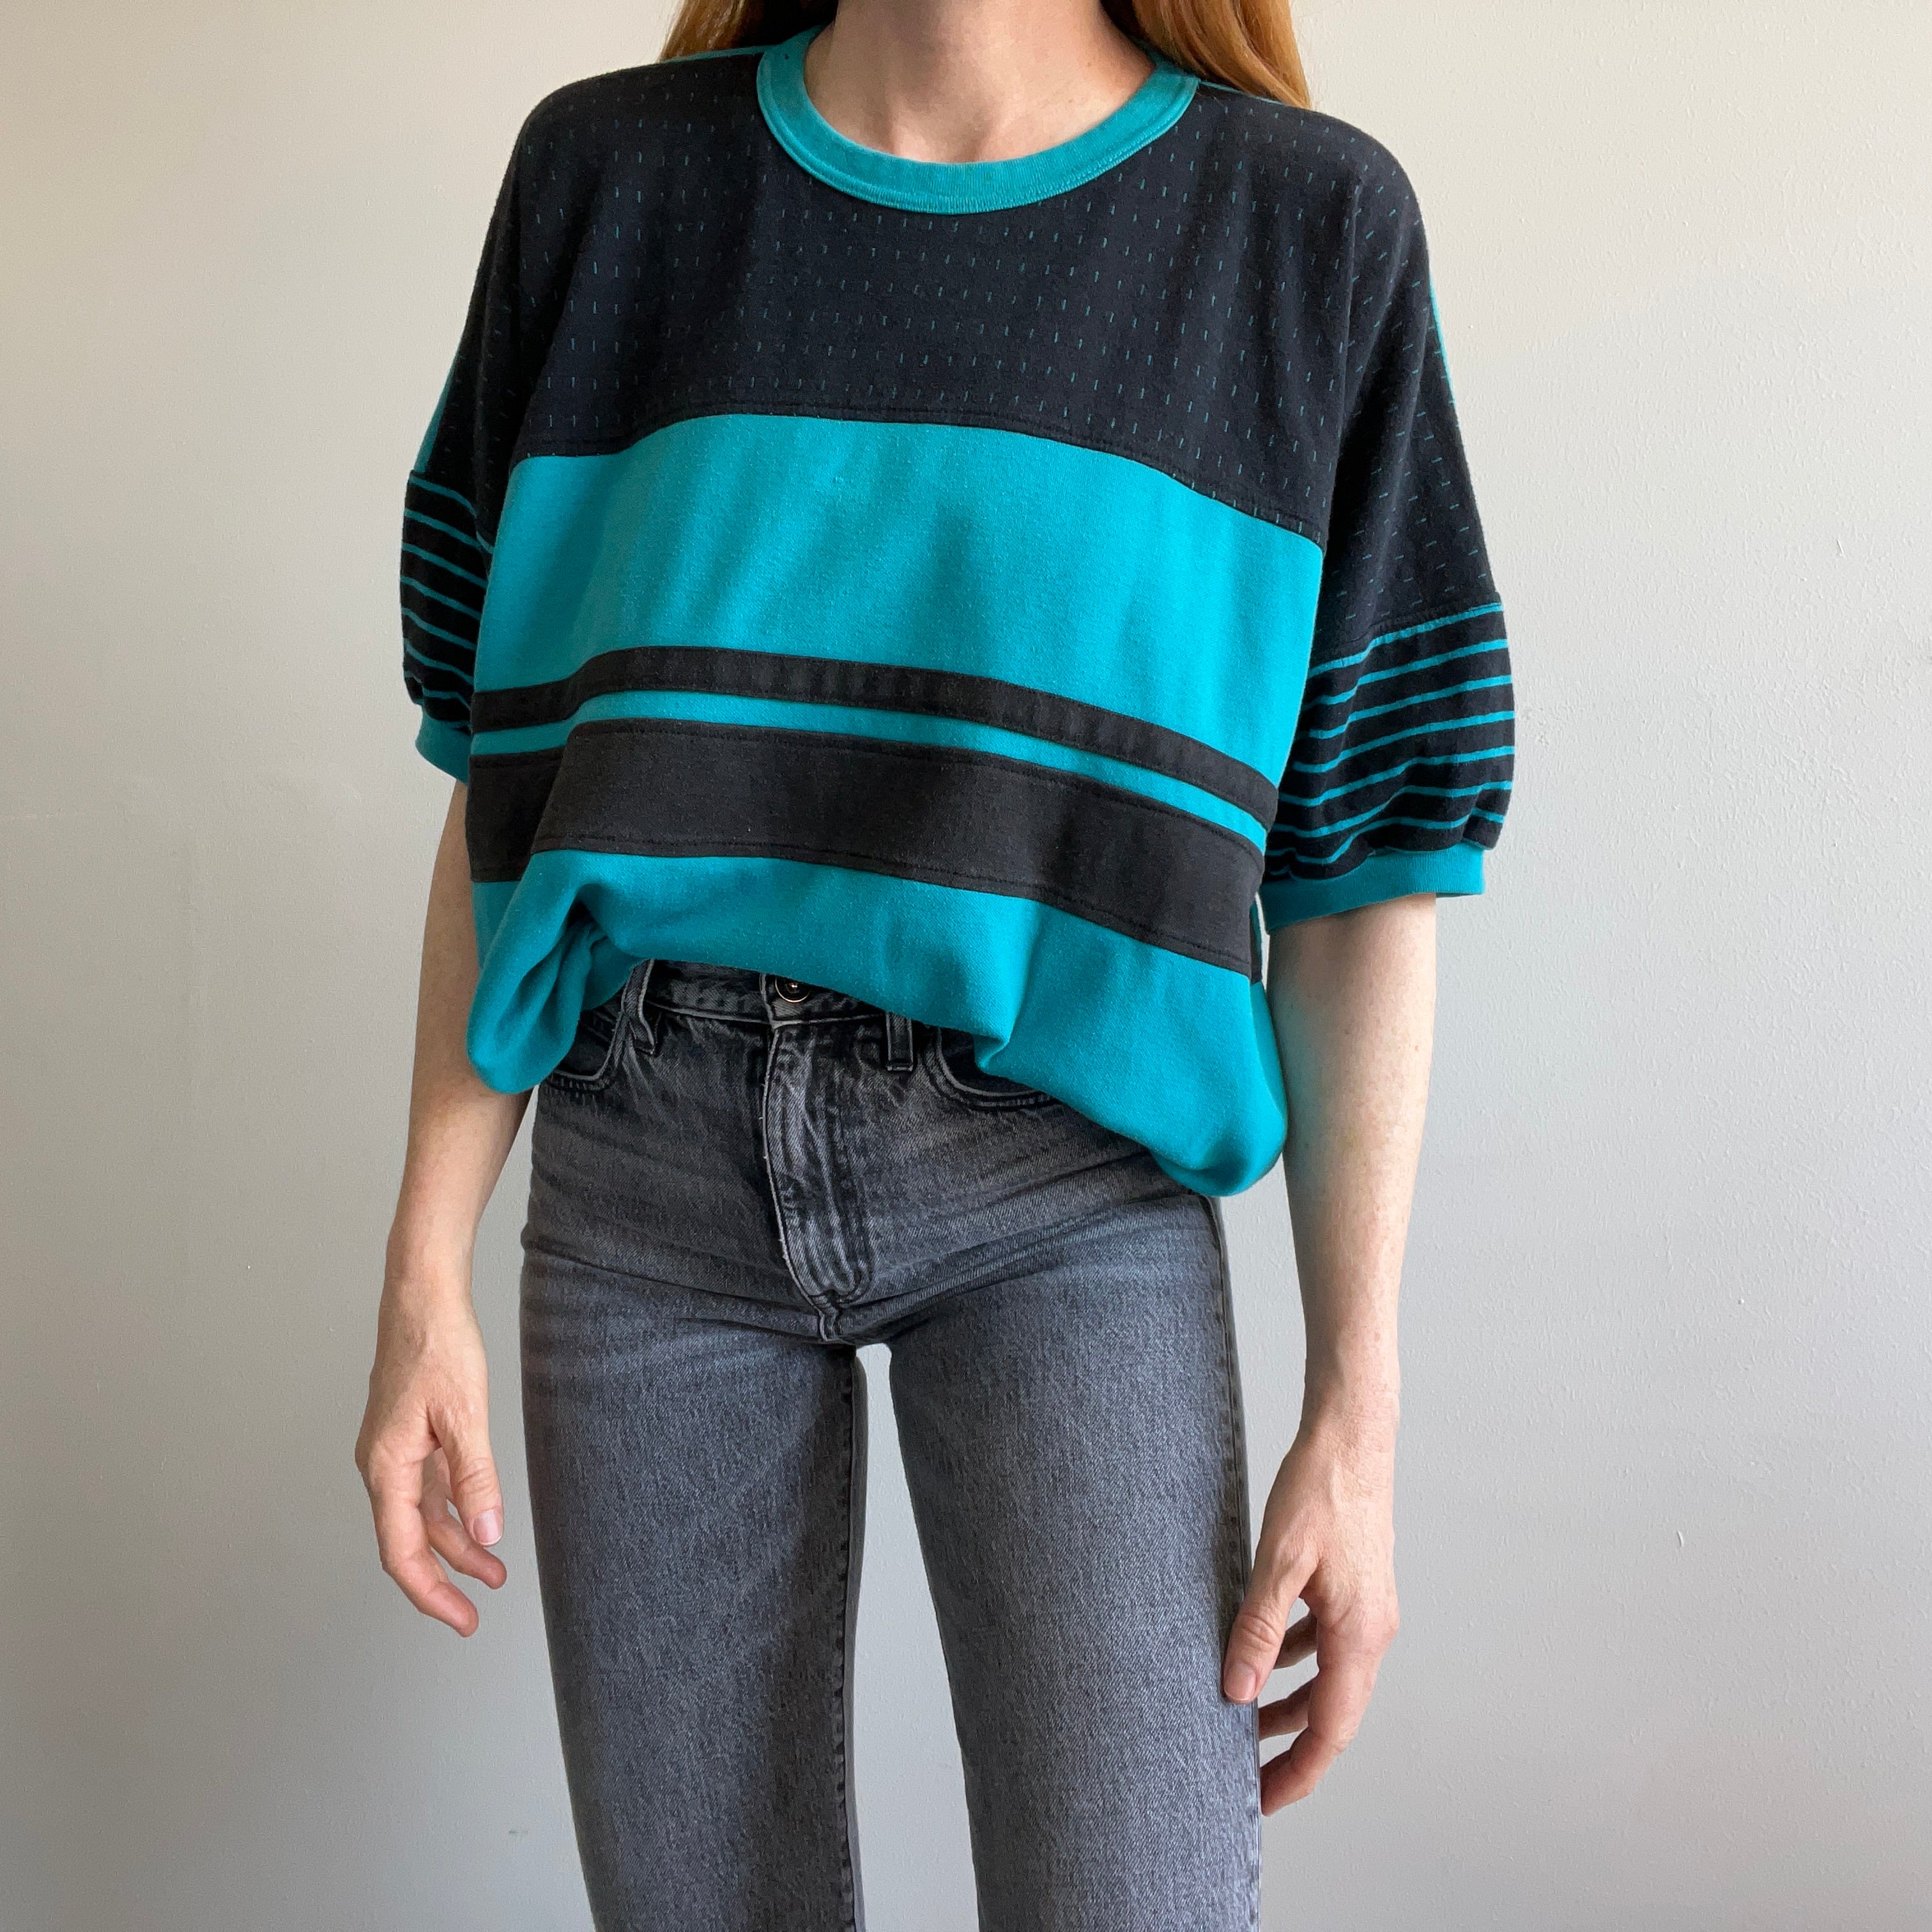 1980s Teal and Black Warm Up